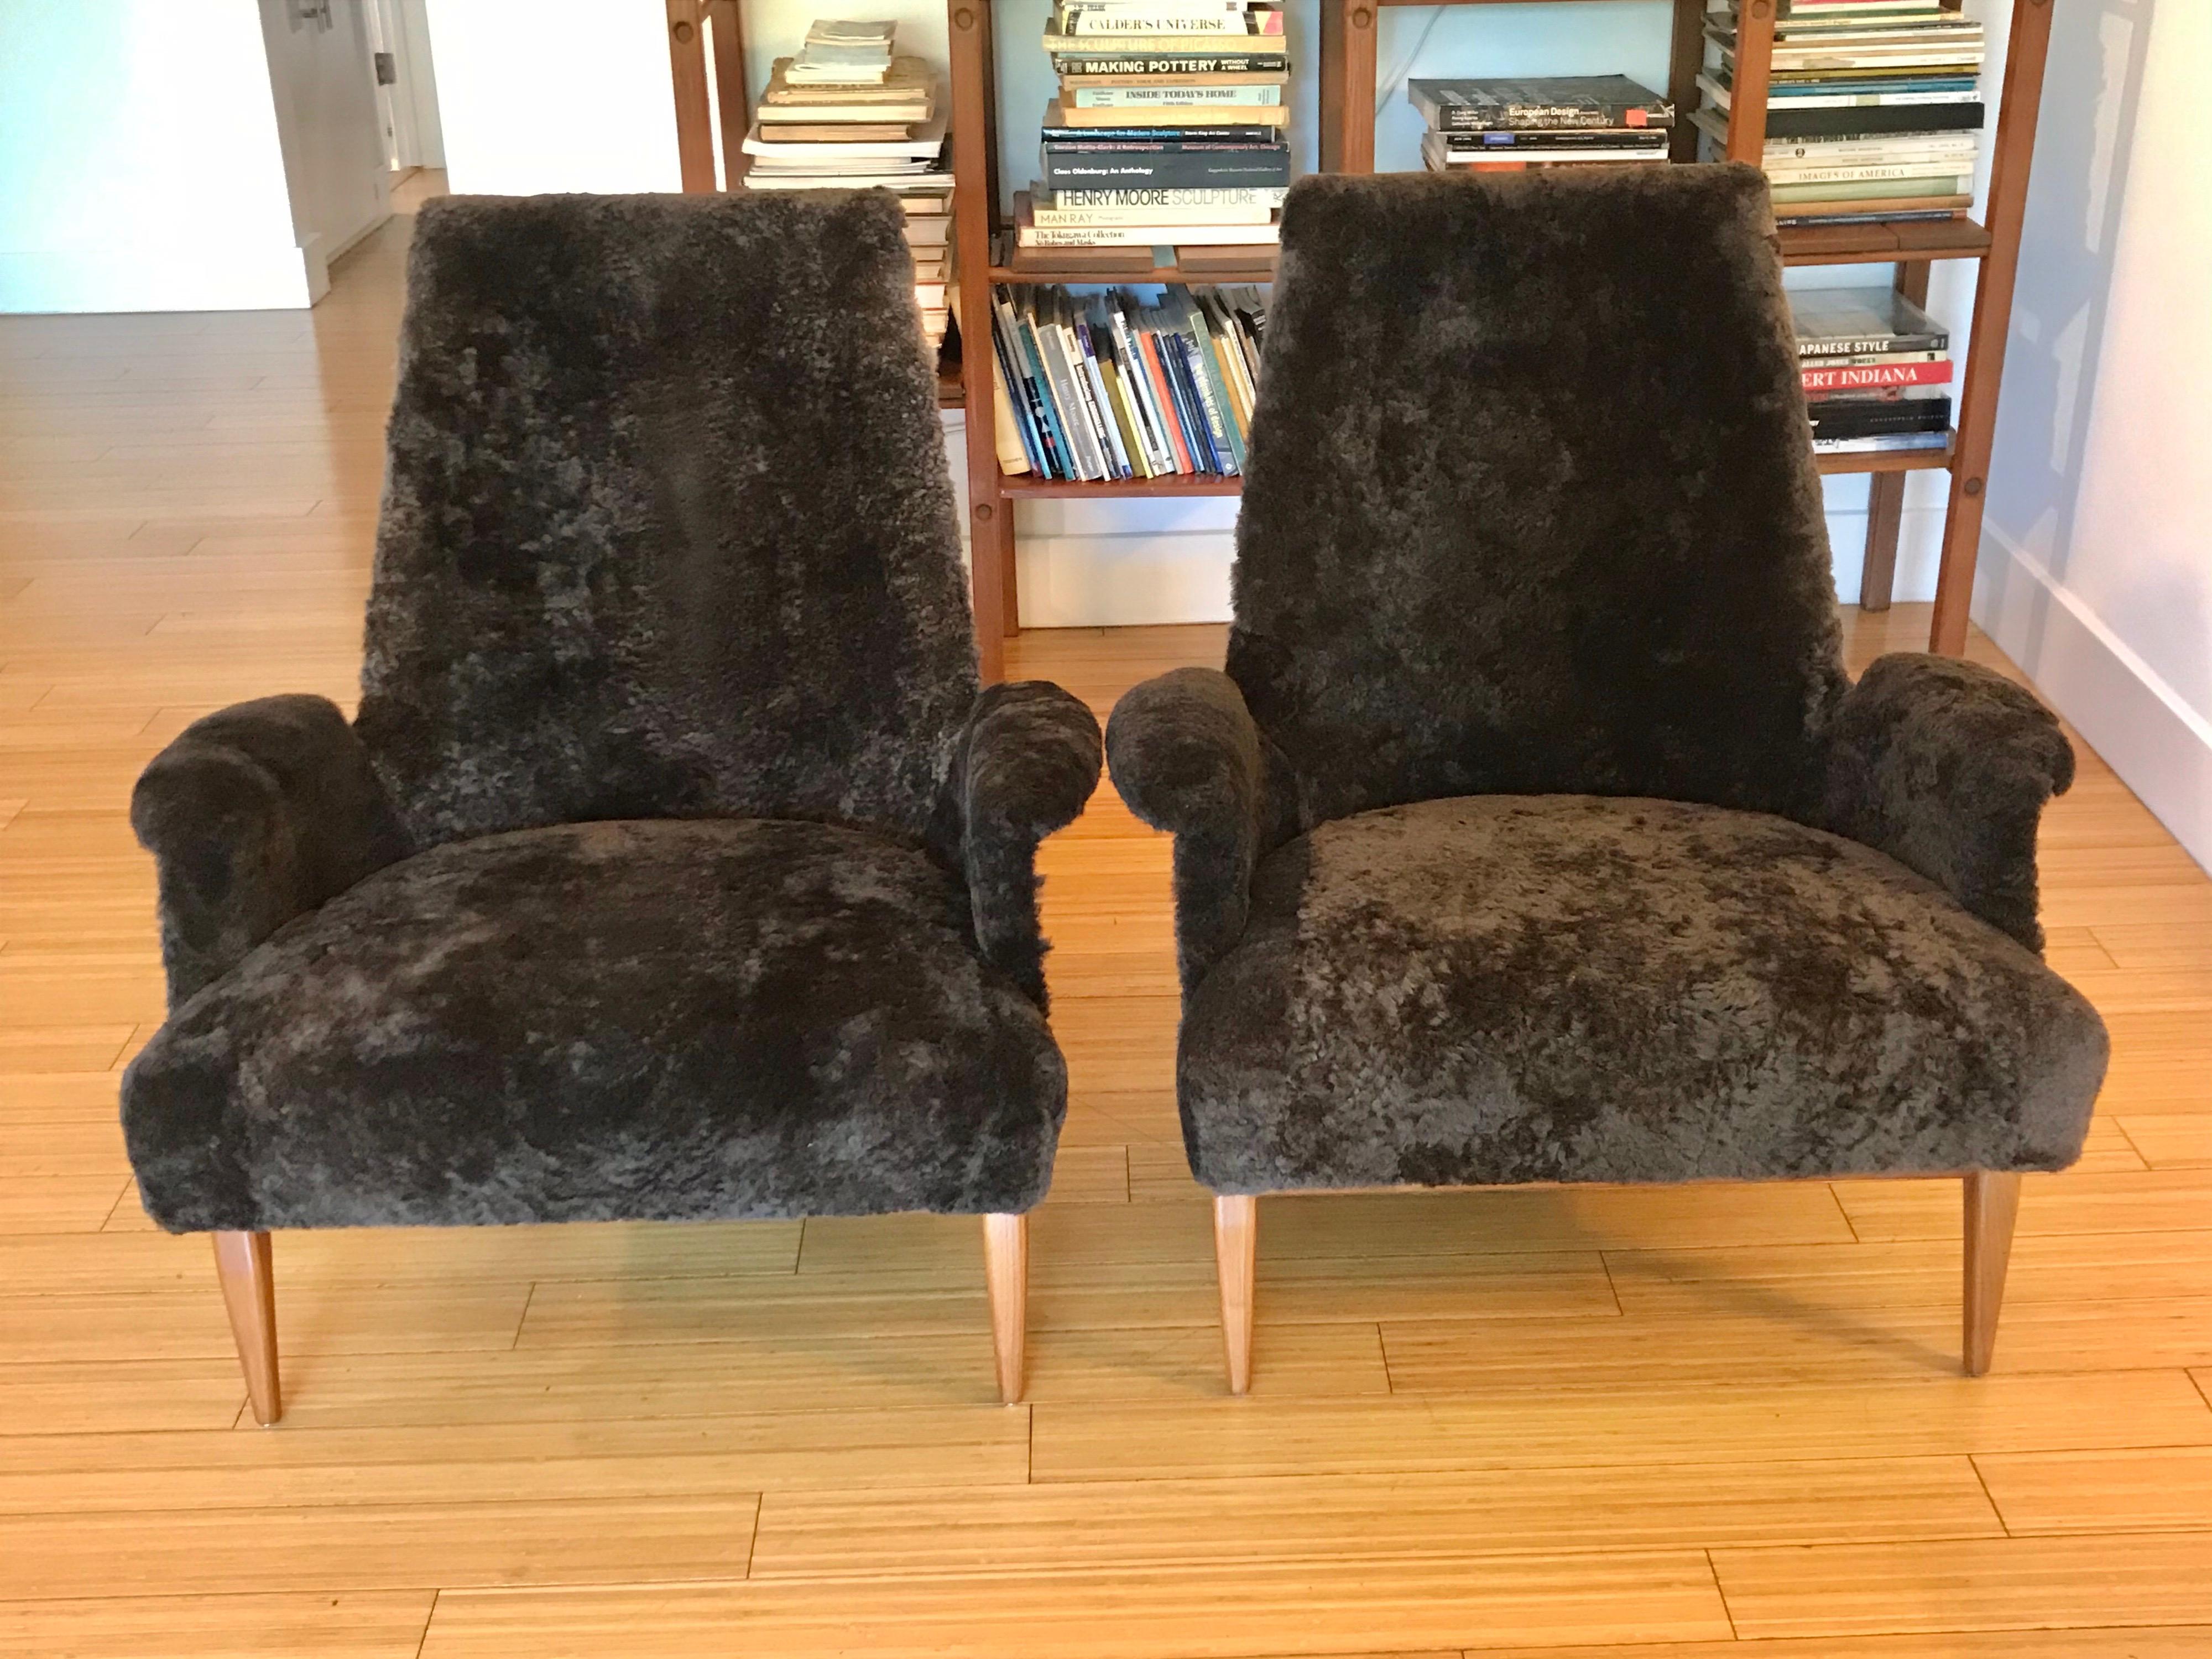 Woodwork Bent Wood Lounge Chairs with Sheepskin Upholstery, 20th Century